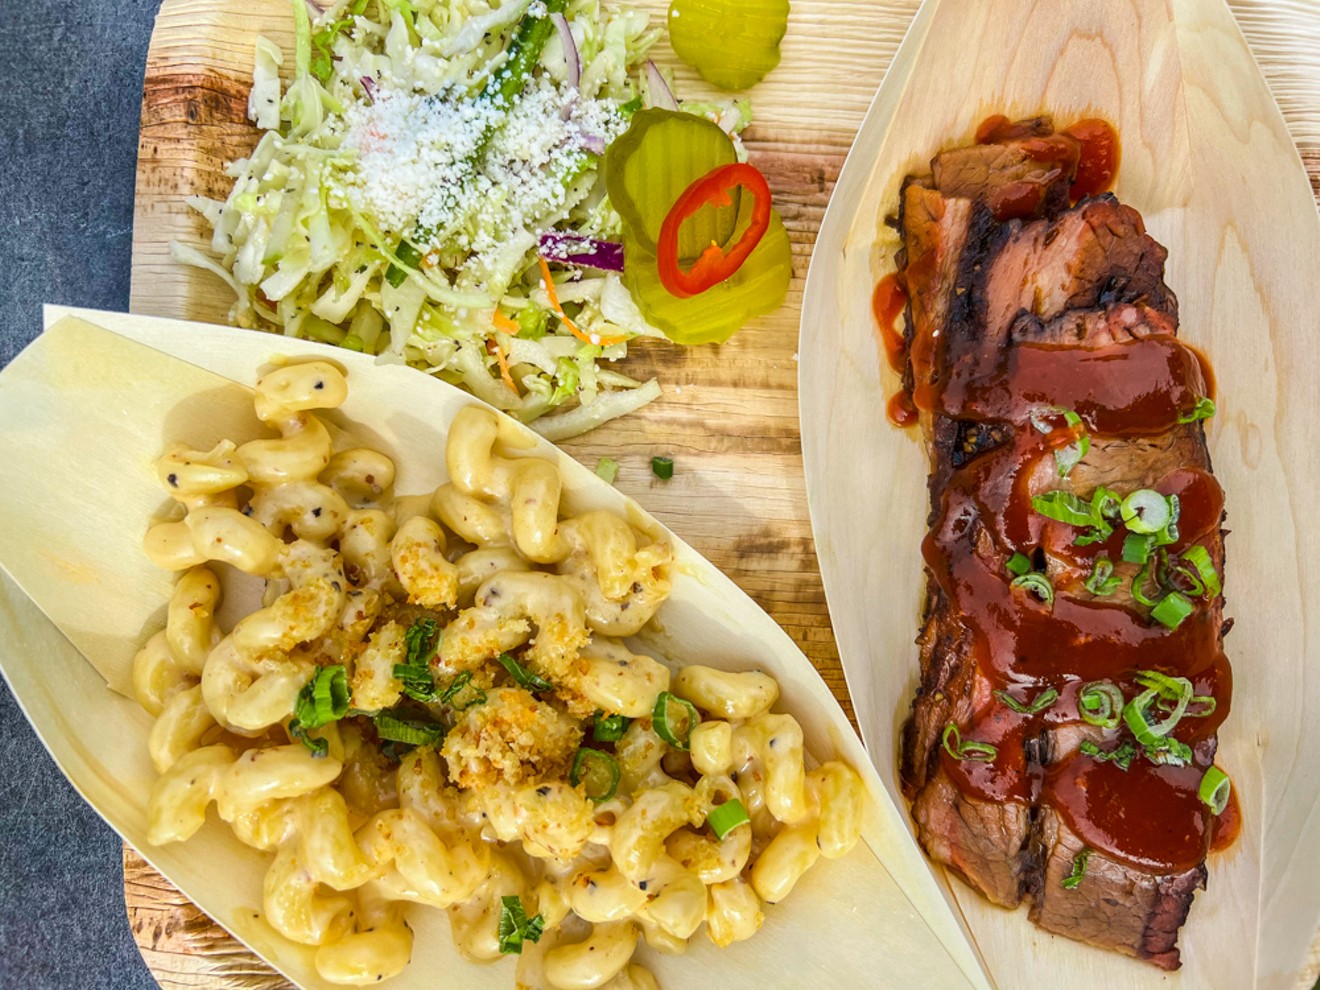 Succulent brisket and savory smoked gouda mac will make your taste buds happy.